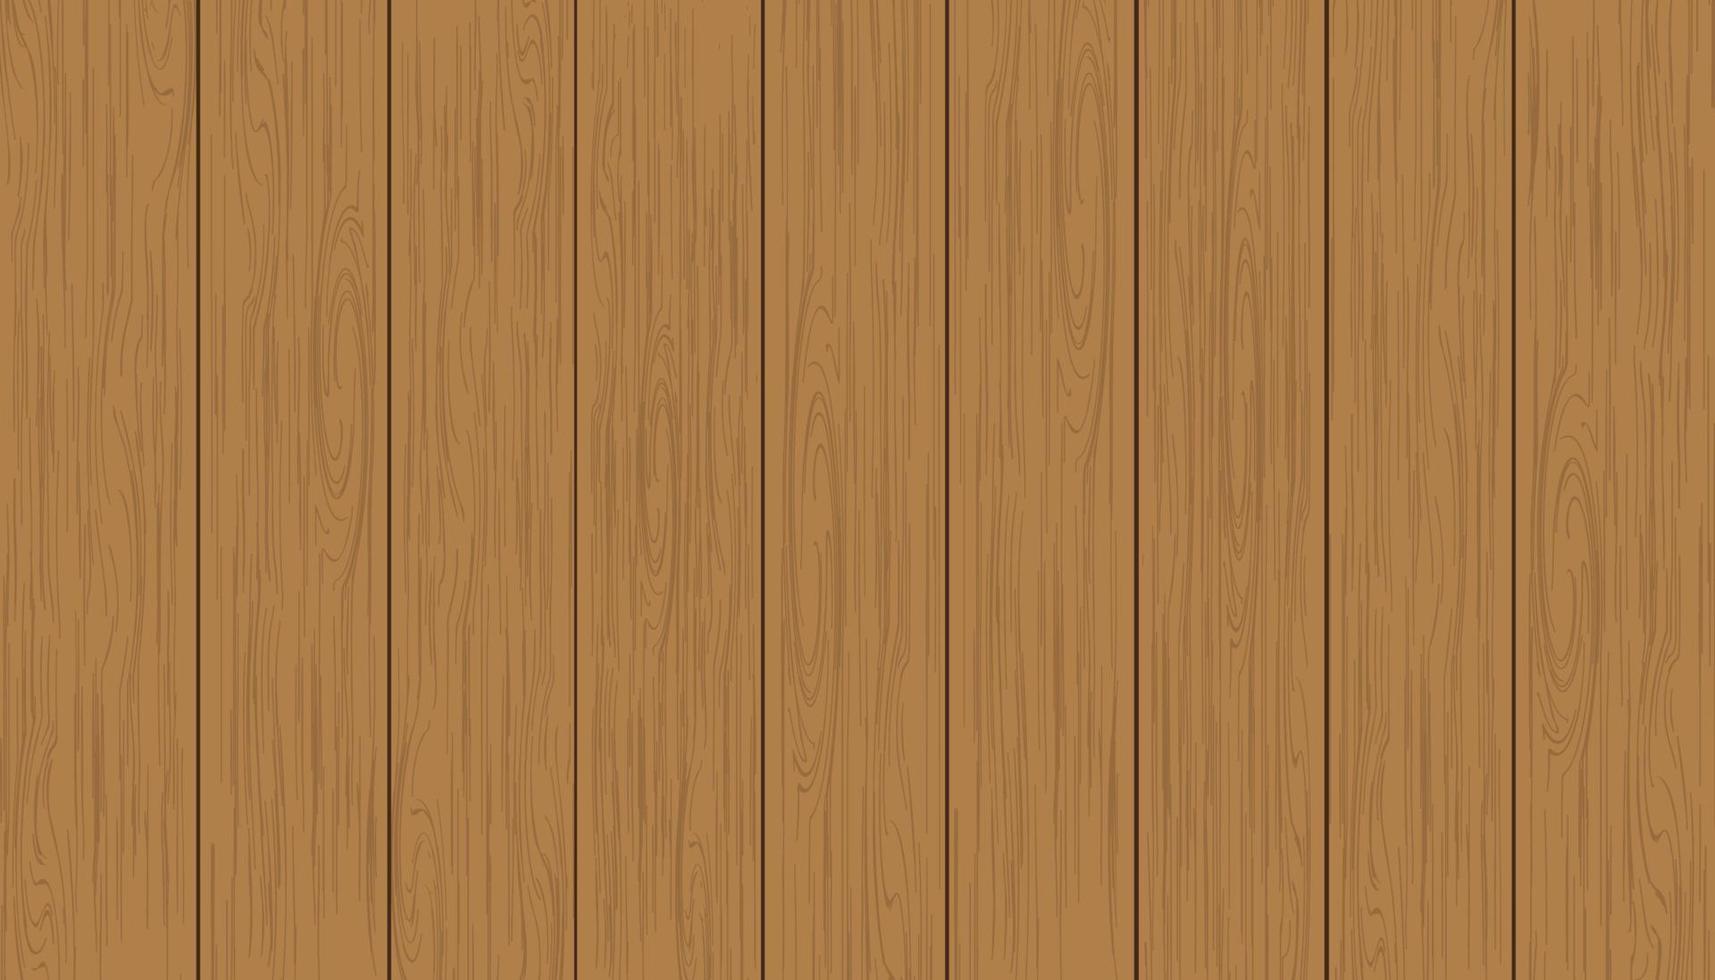 Brown wood texture background,Wooden panel with abstract pattern,Vector illustration Table top view of hardwood floor surface,3d wooden lumber backdrop good for advertising background vector